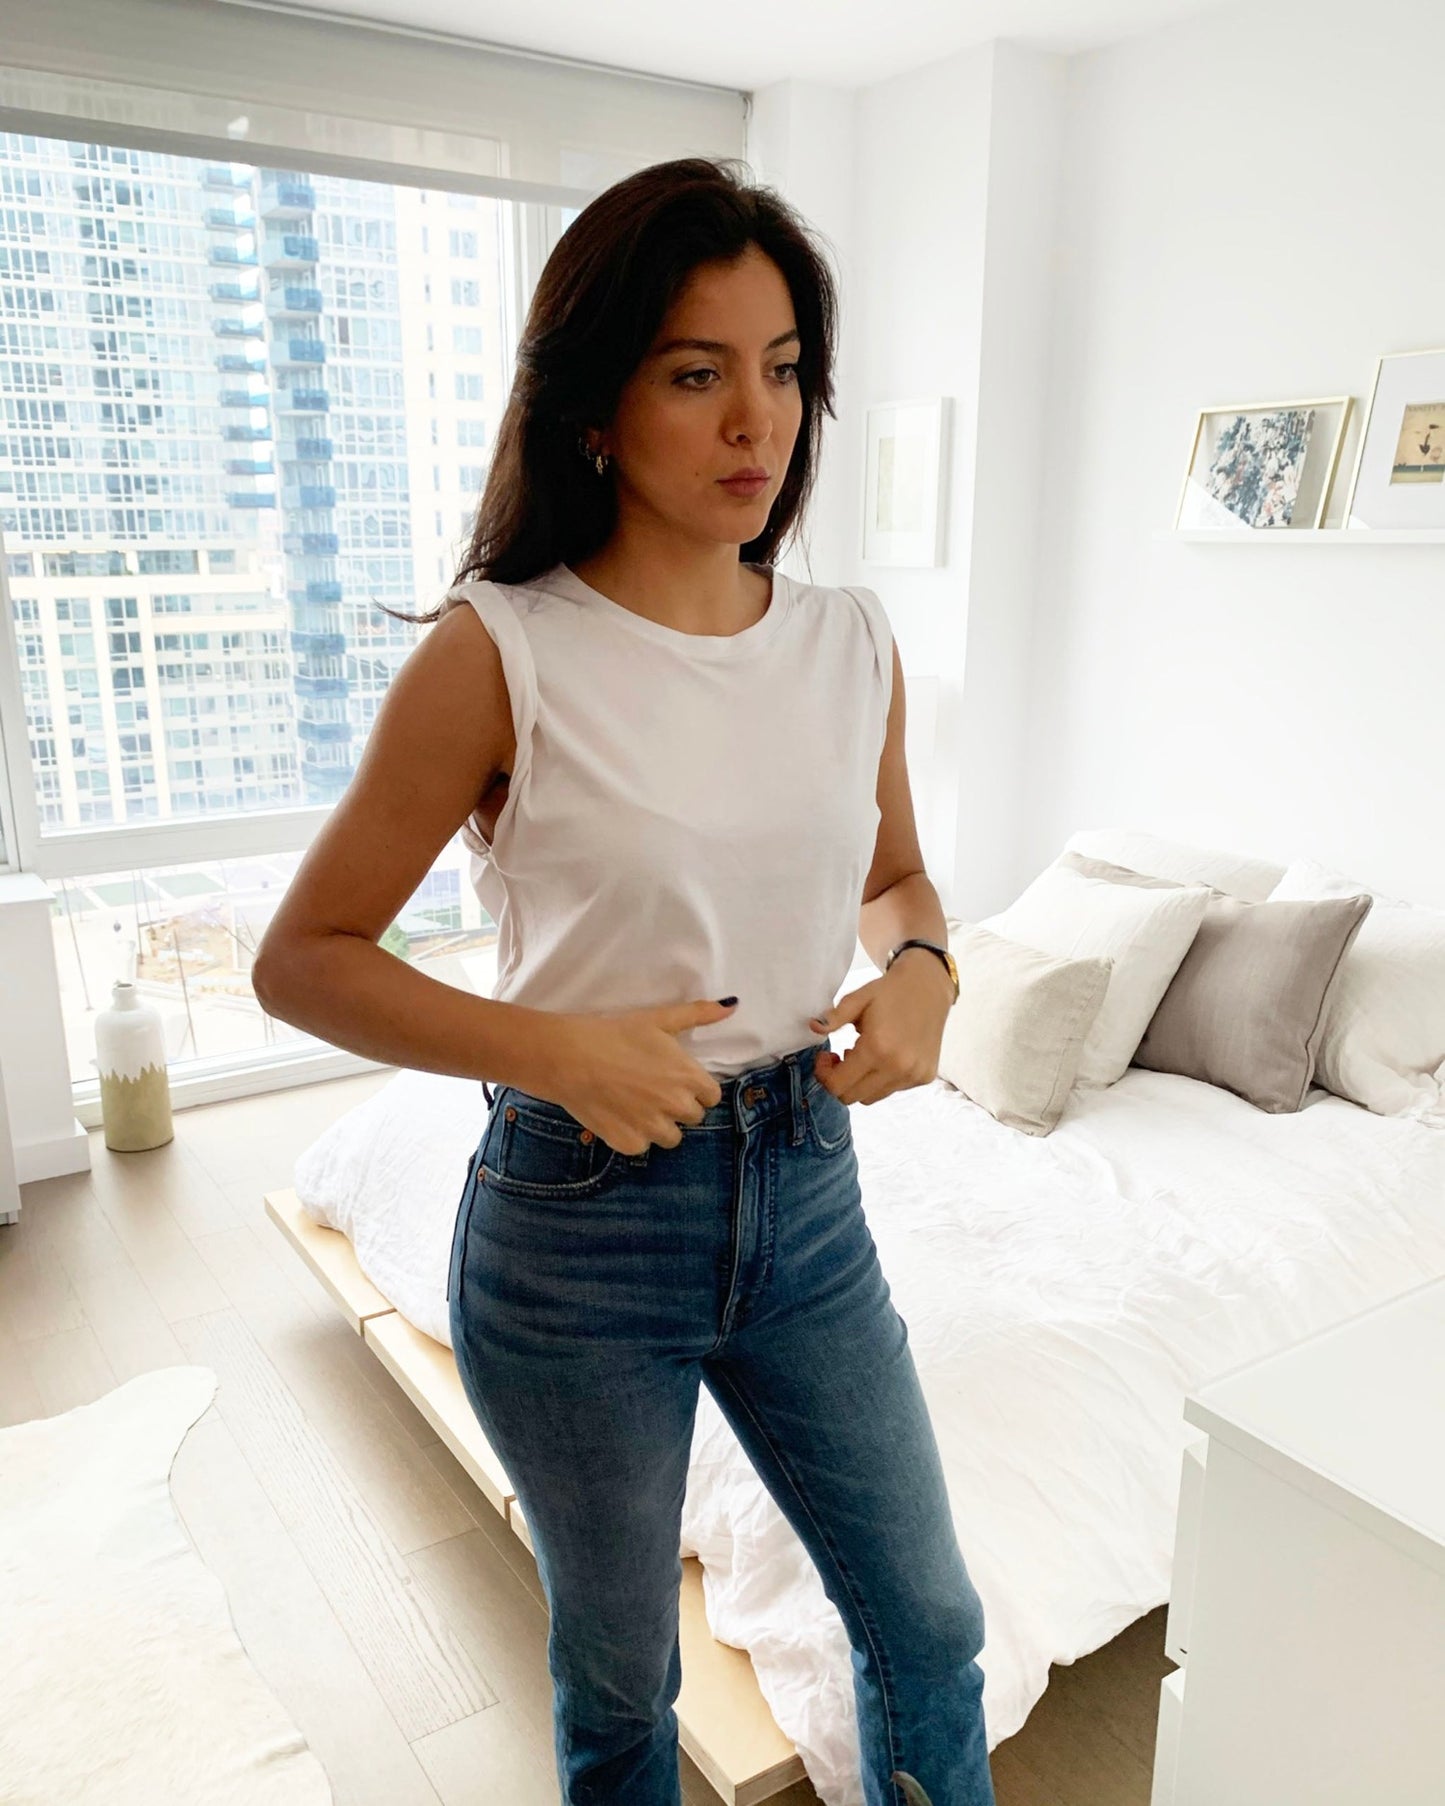 Thin, white model with brunette hair wearing a white pima cotton muscle tee and blue jeans posing in city apartment bedroom